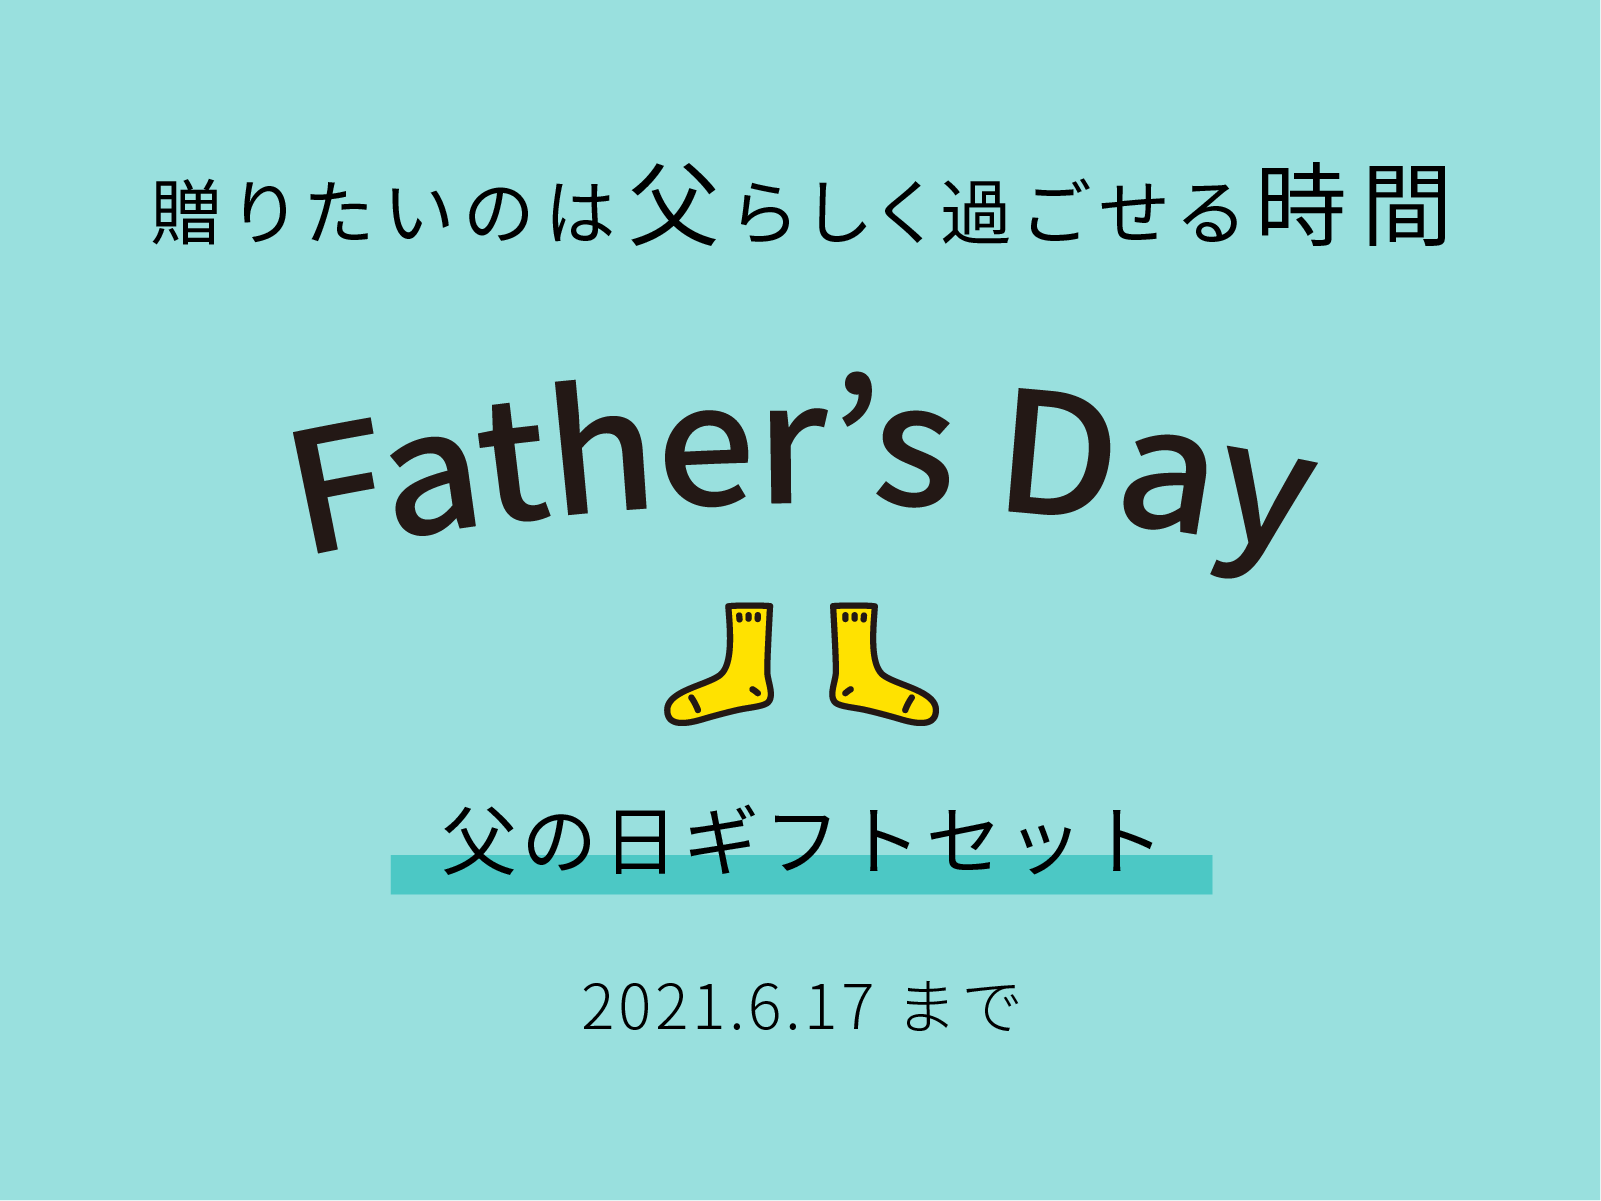 210531_20210620fathersday_tn.png